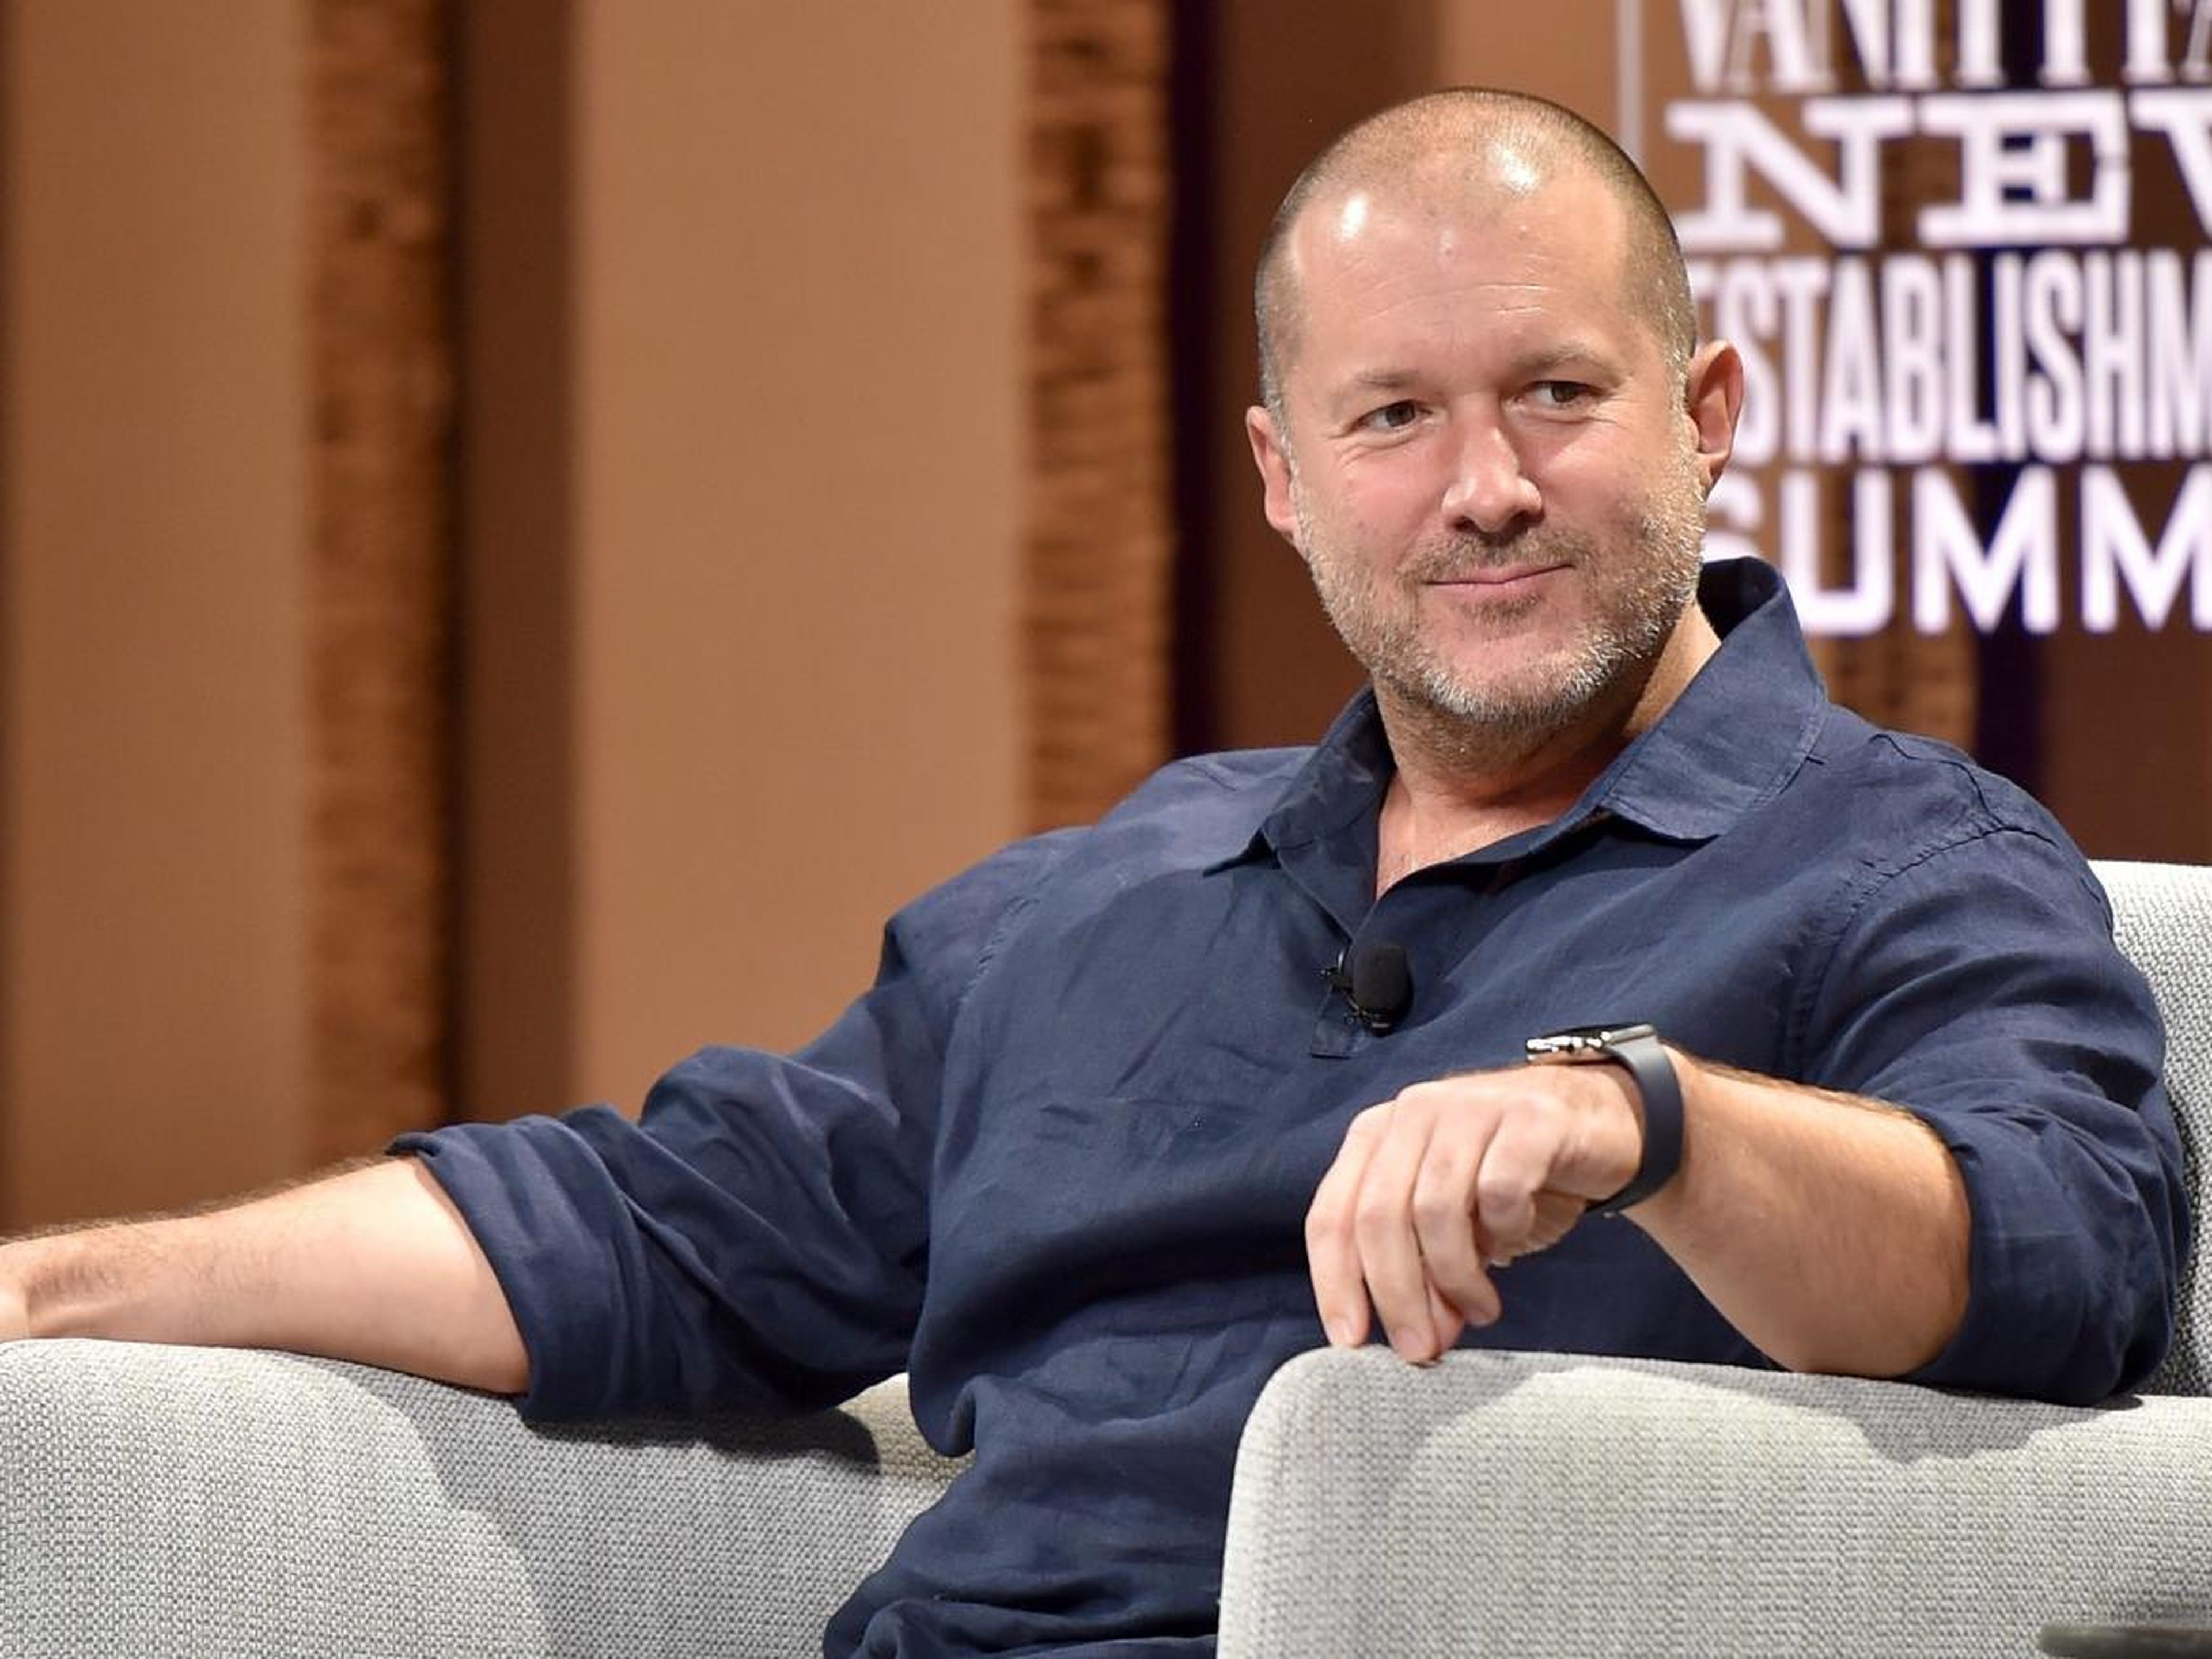 Jobs' plane didn't leave the Apple family, however. Apple's revered head of product design, Jony Ive, bought the plane "at a significant discount" from the former CEO's widow, Laurene Powell Jobs. Ive helped Jobs to design the